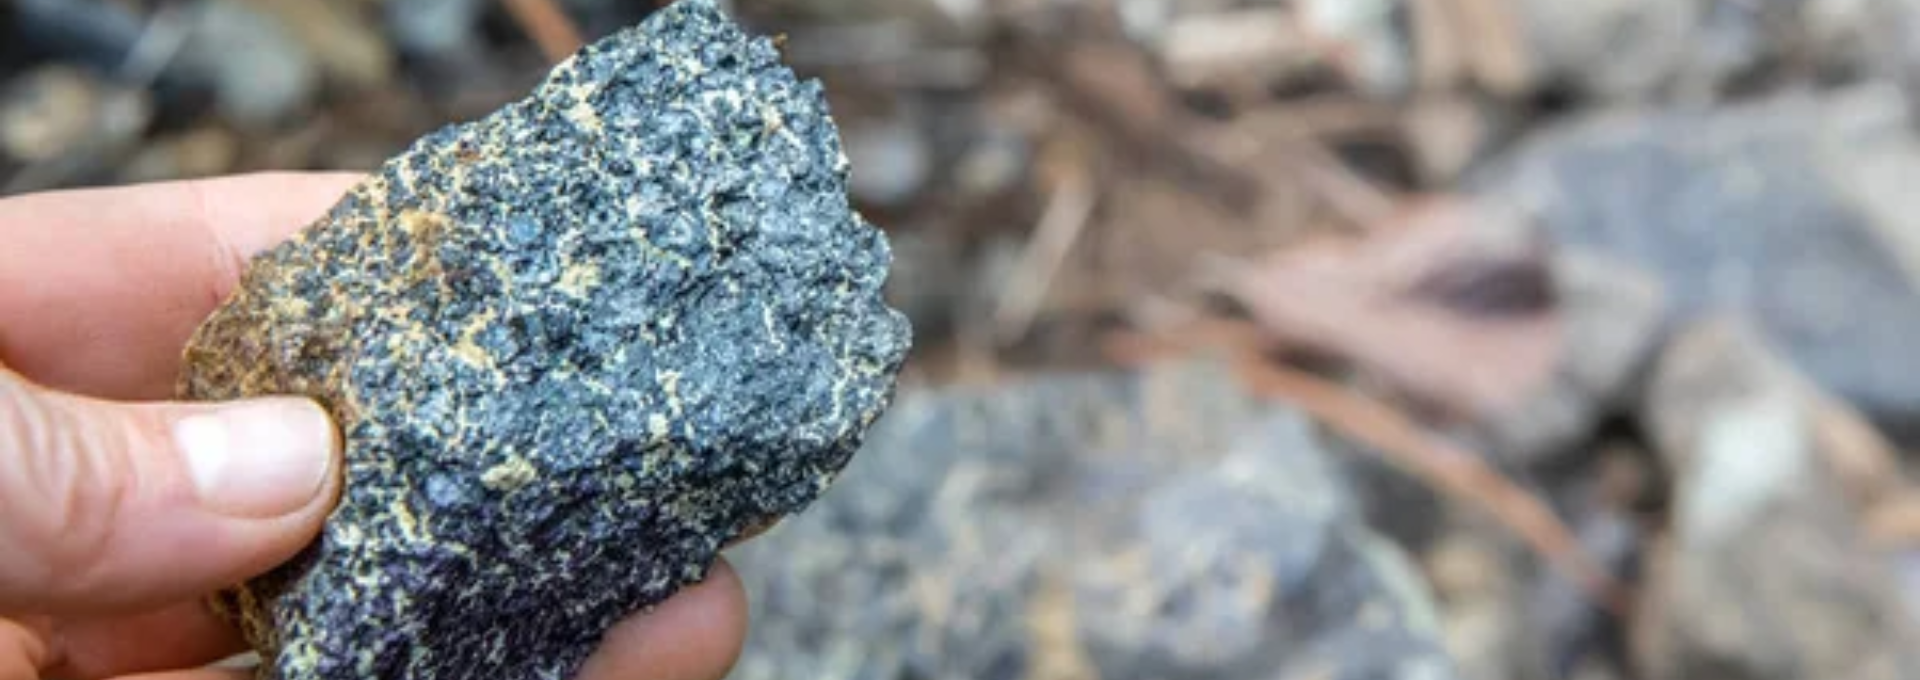 chromite ore source from pakistan